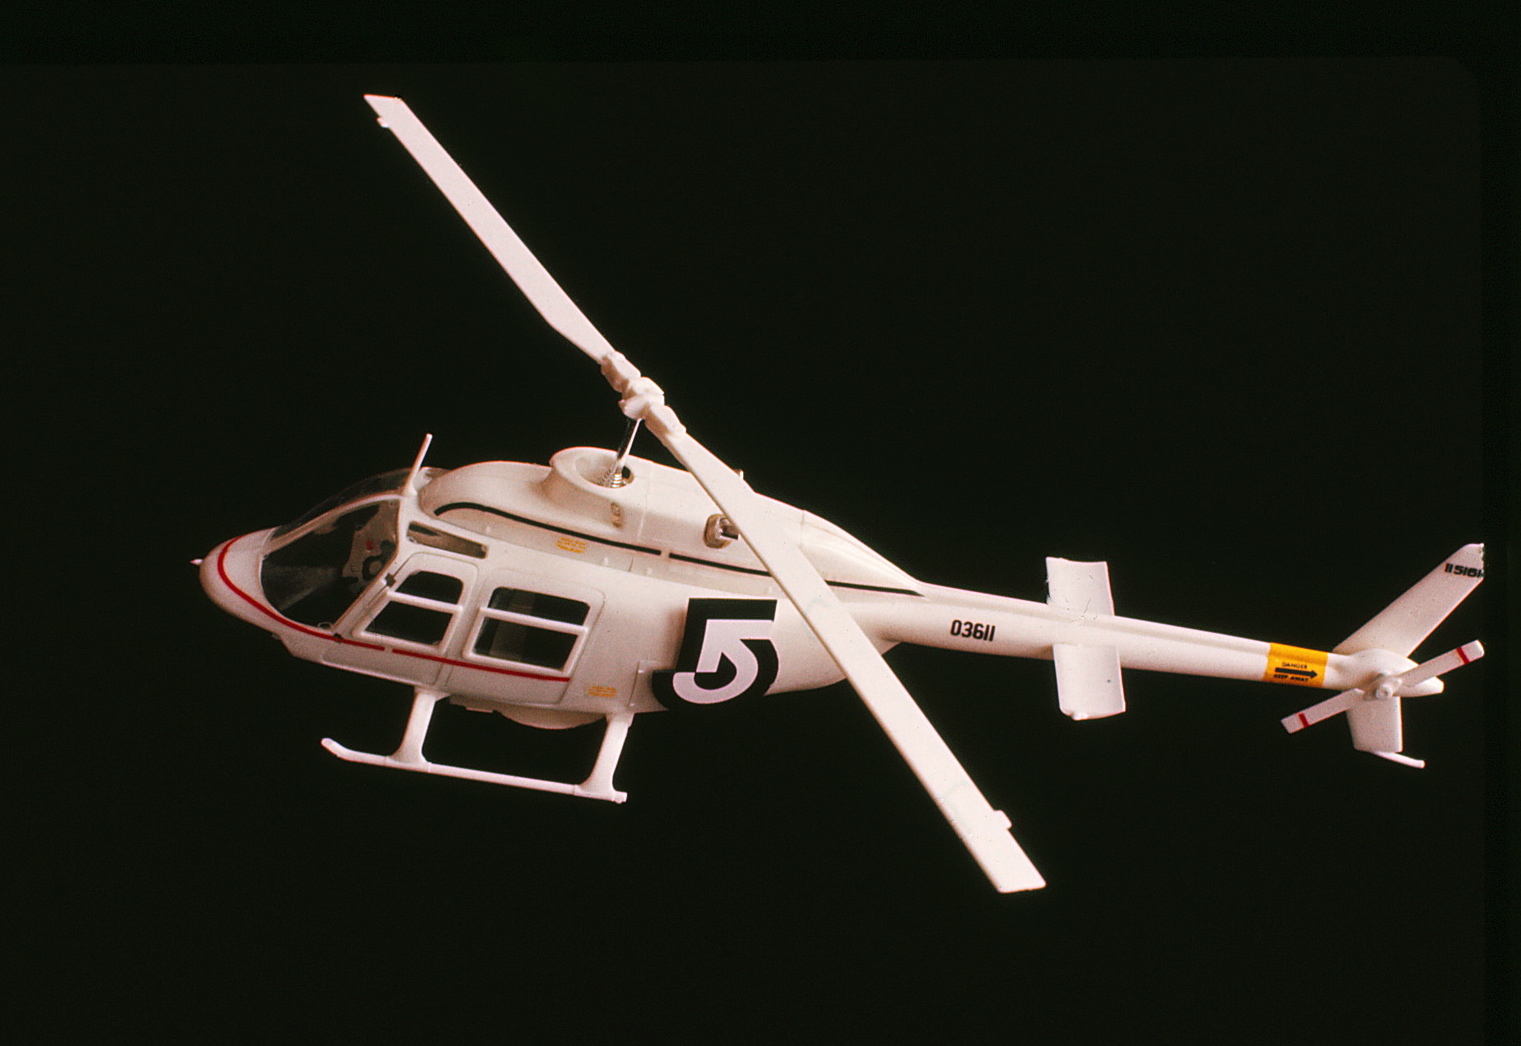 Model of helicopter with logo on it